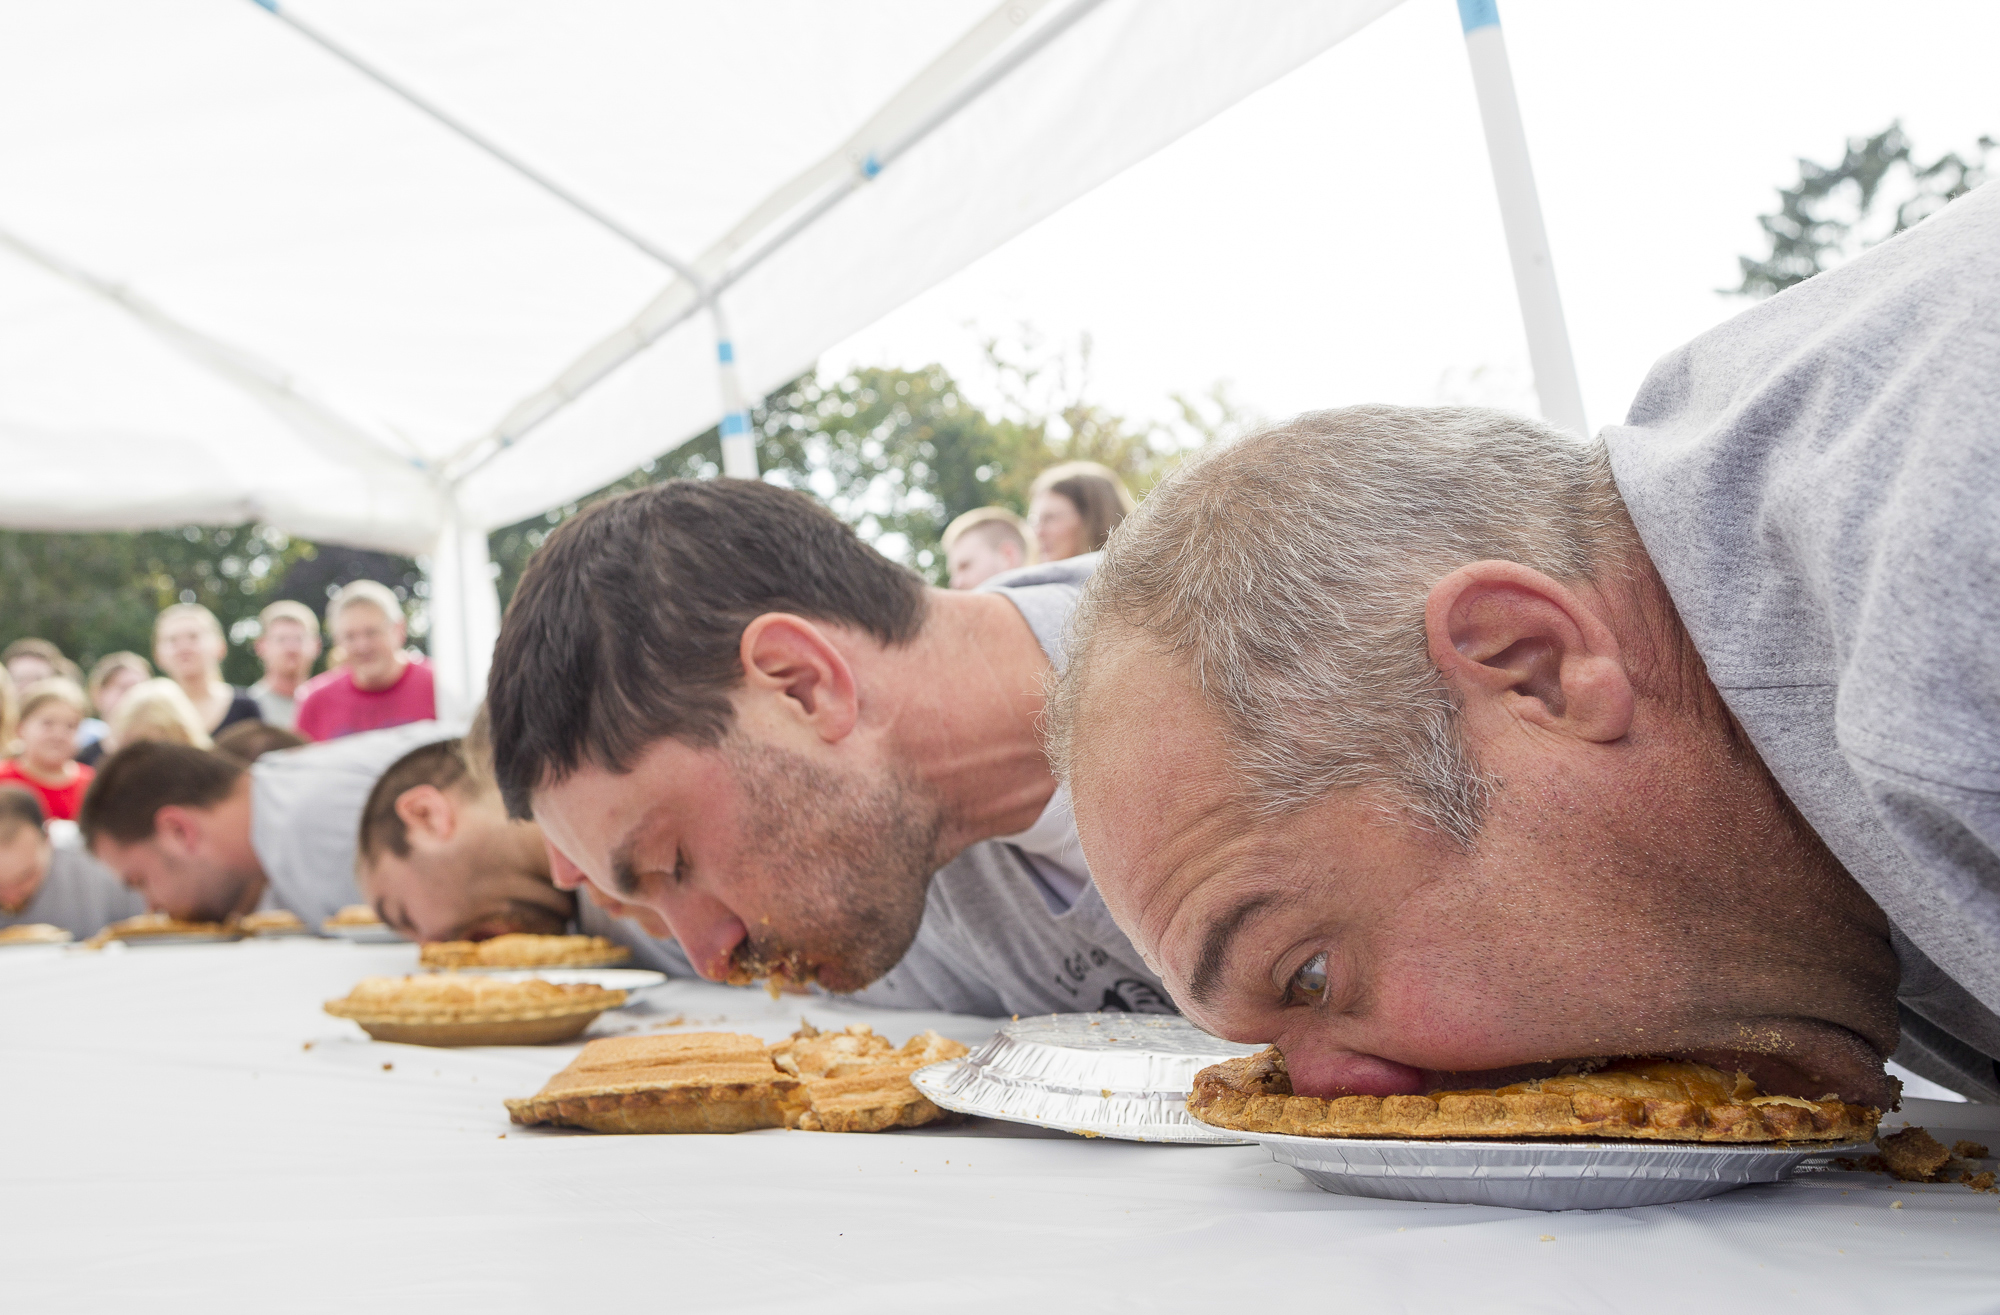 Doug (right) competes in the annual pie eating contest hosted by Apple Fest in Hilton, New York on Sunday October 6, 2013. Photo by Tom Brenner. 